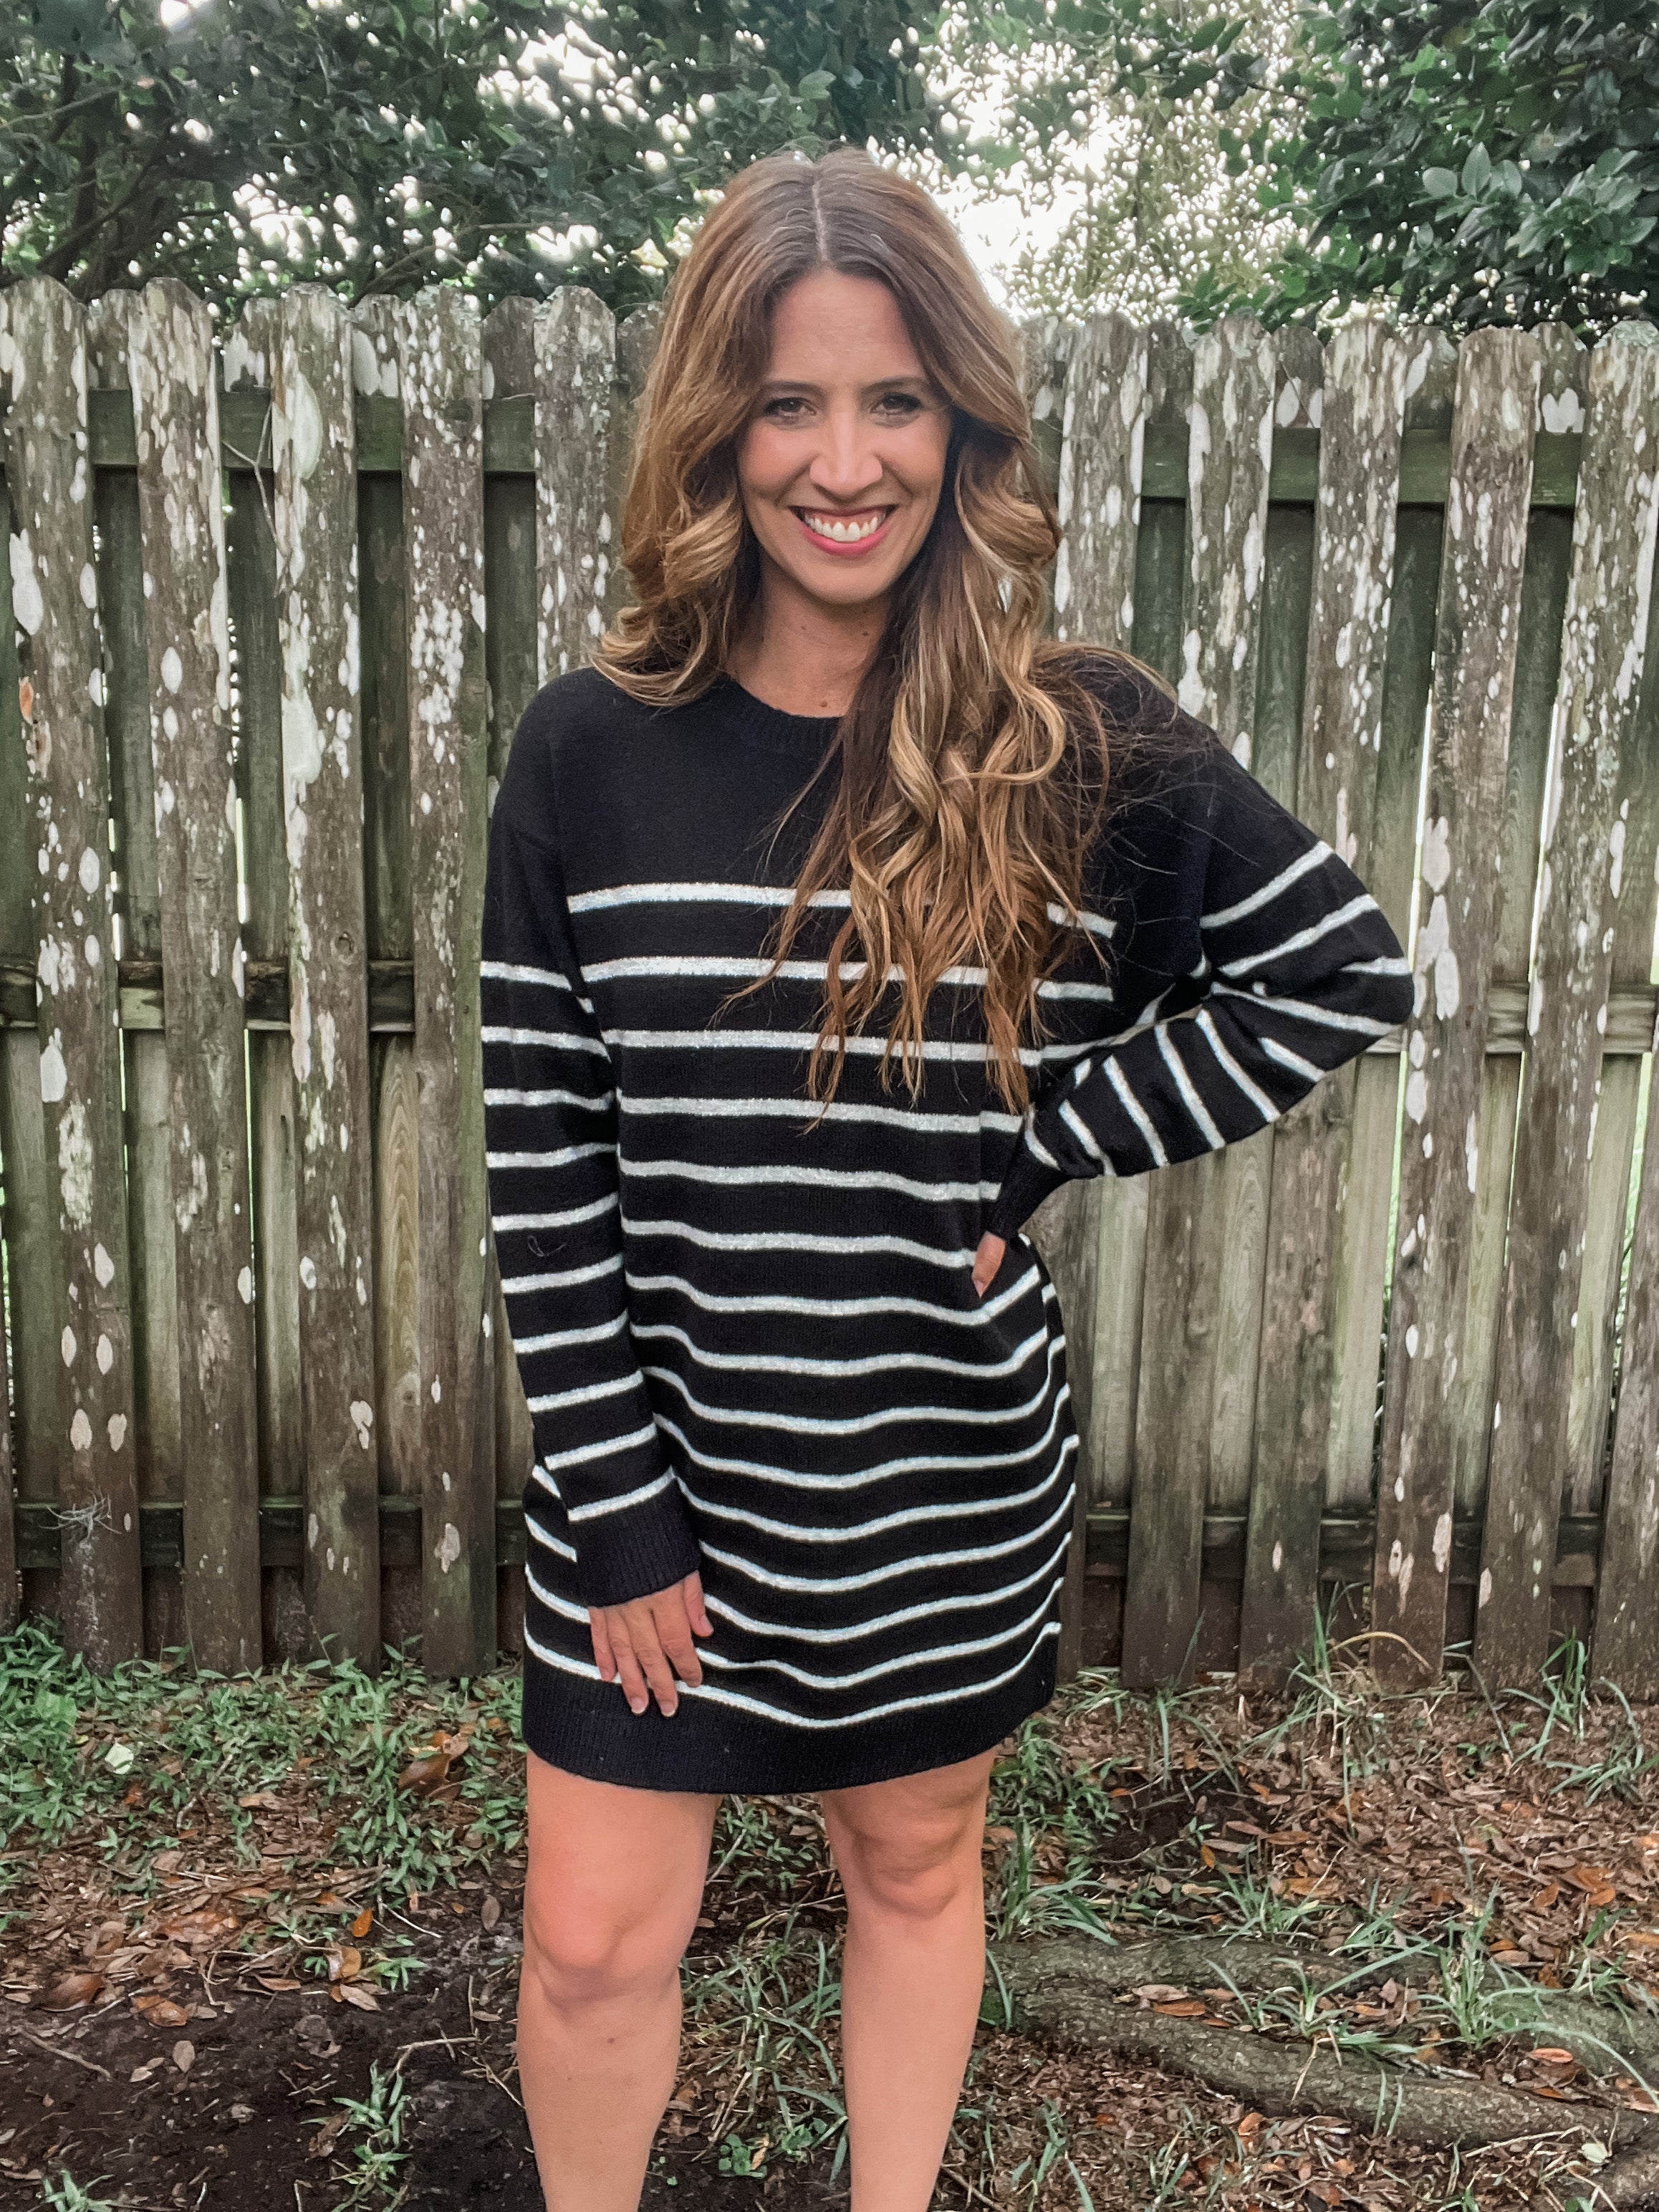 Casually Chic Striped Sweater Dress